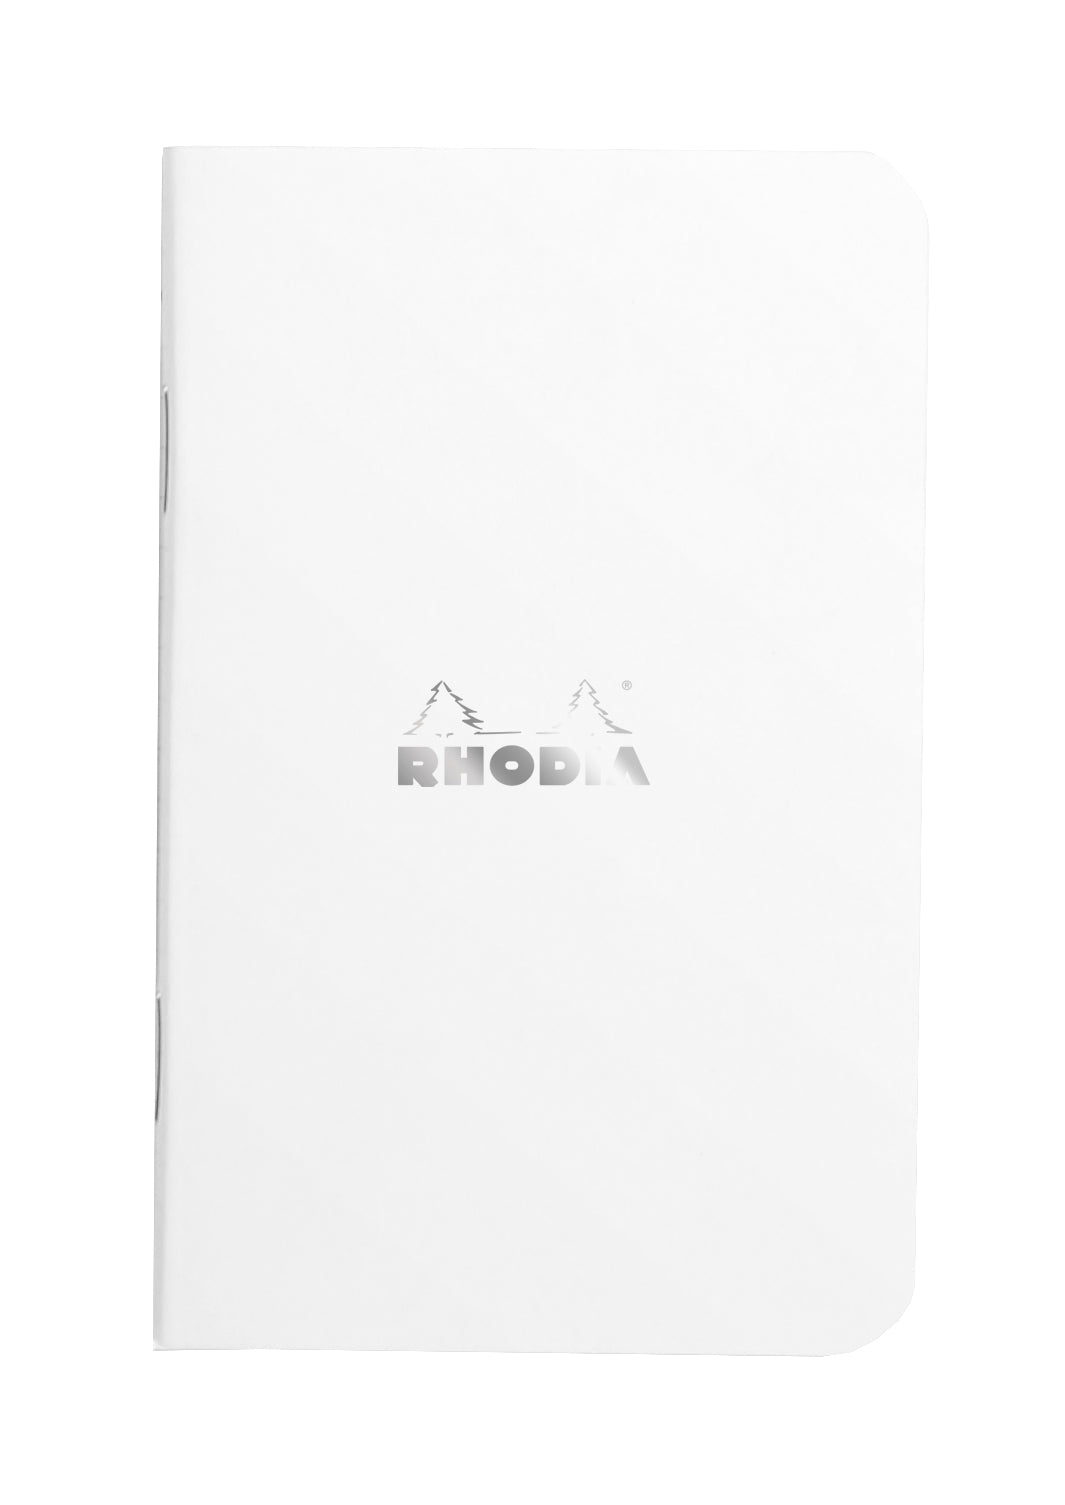 Rhodia Classic Stapled Line Ruled Notebook - A4